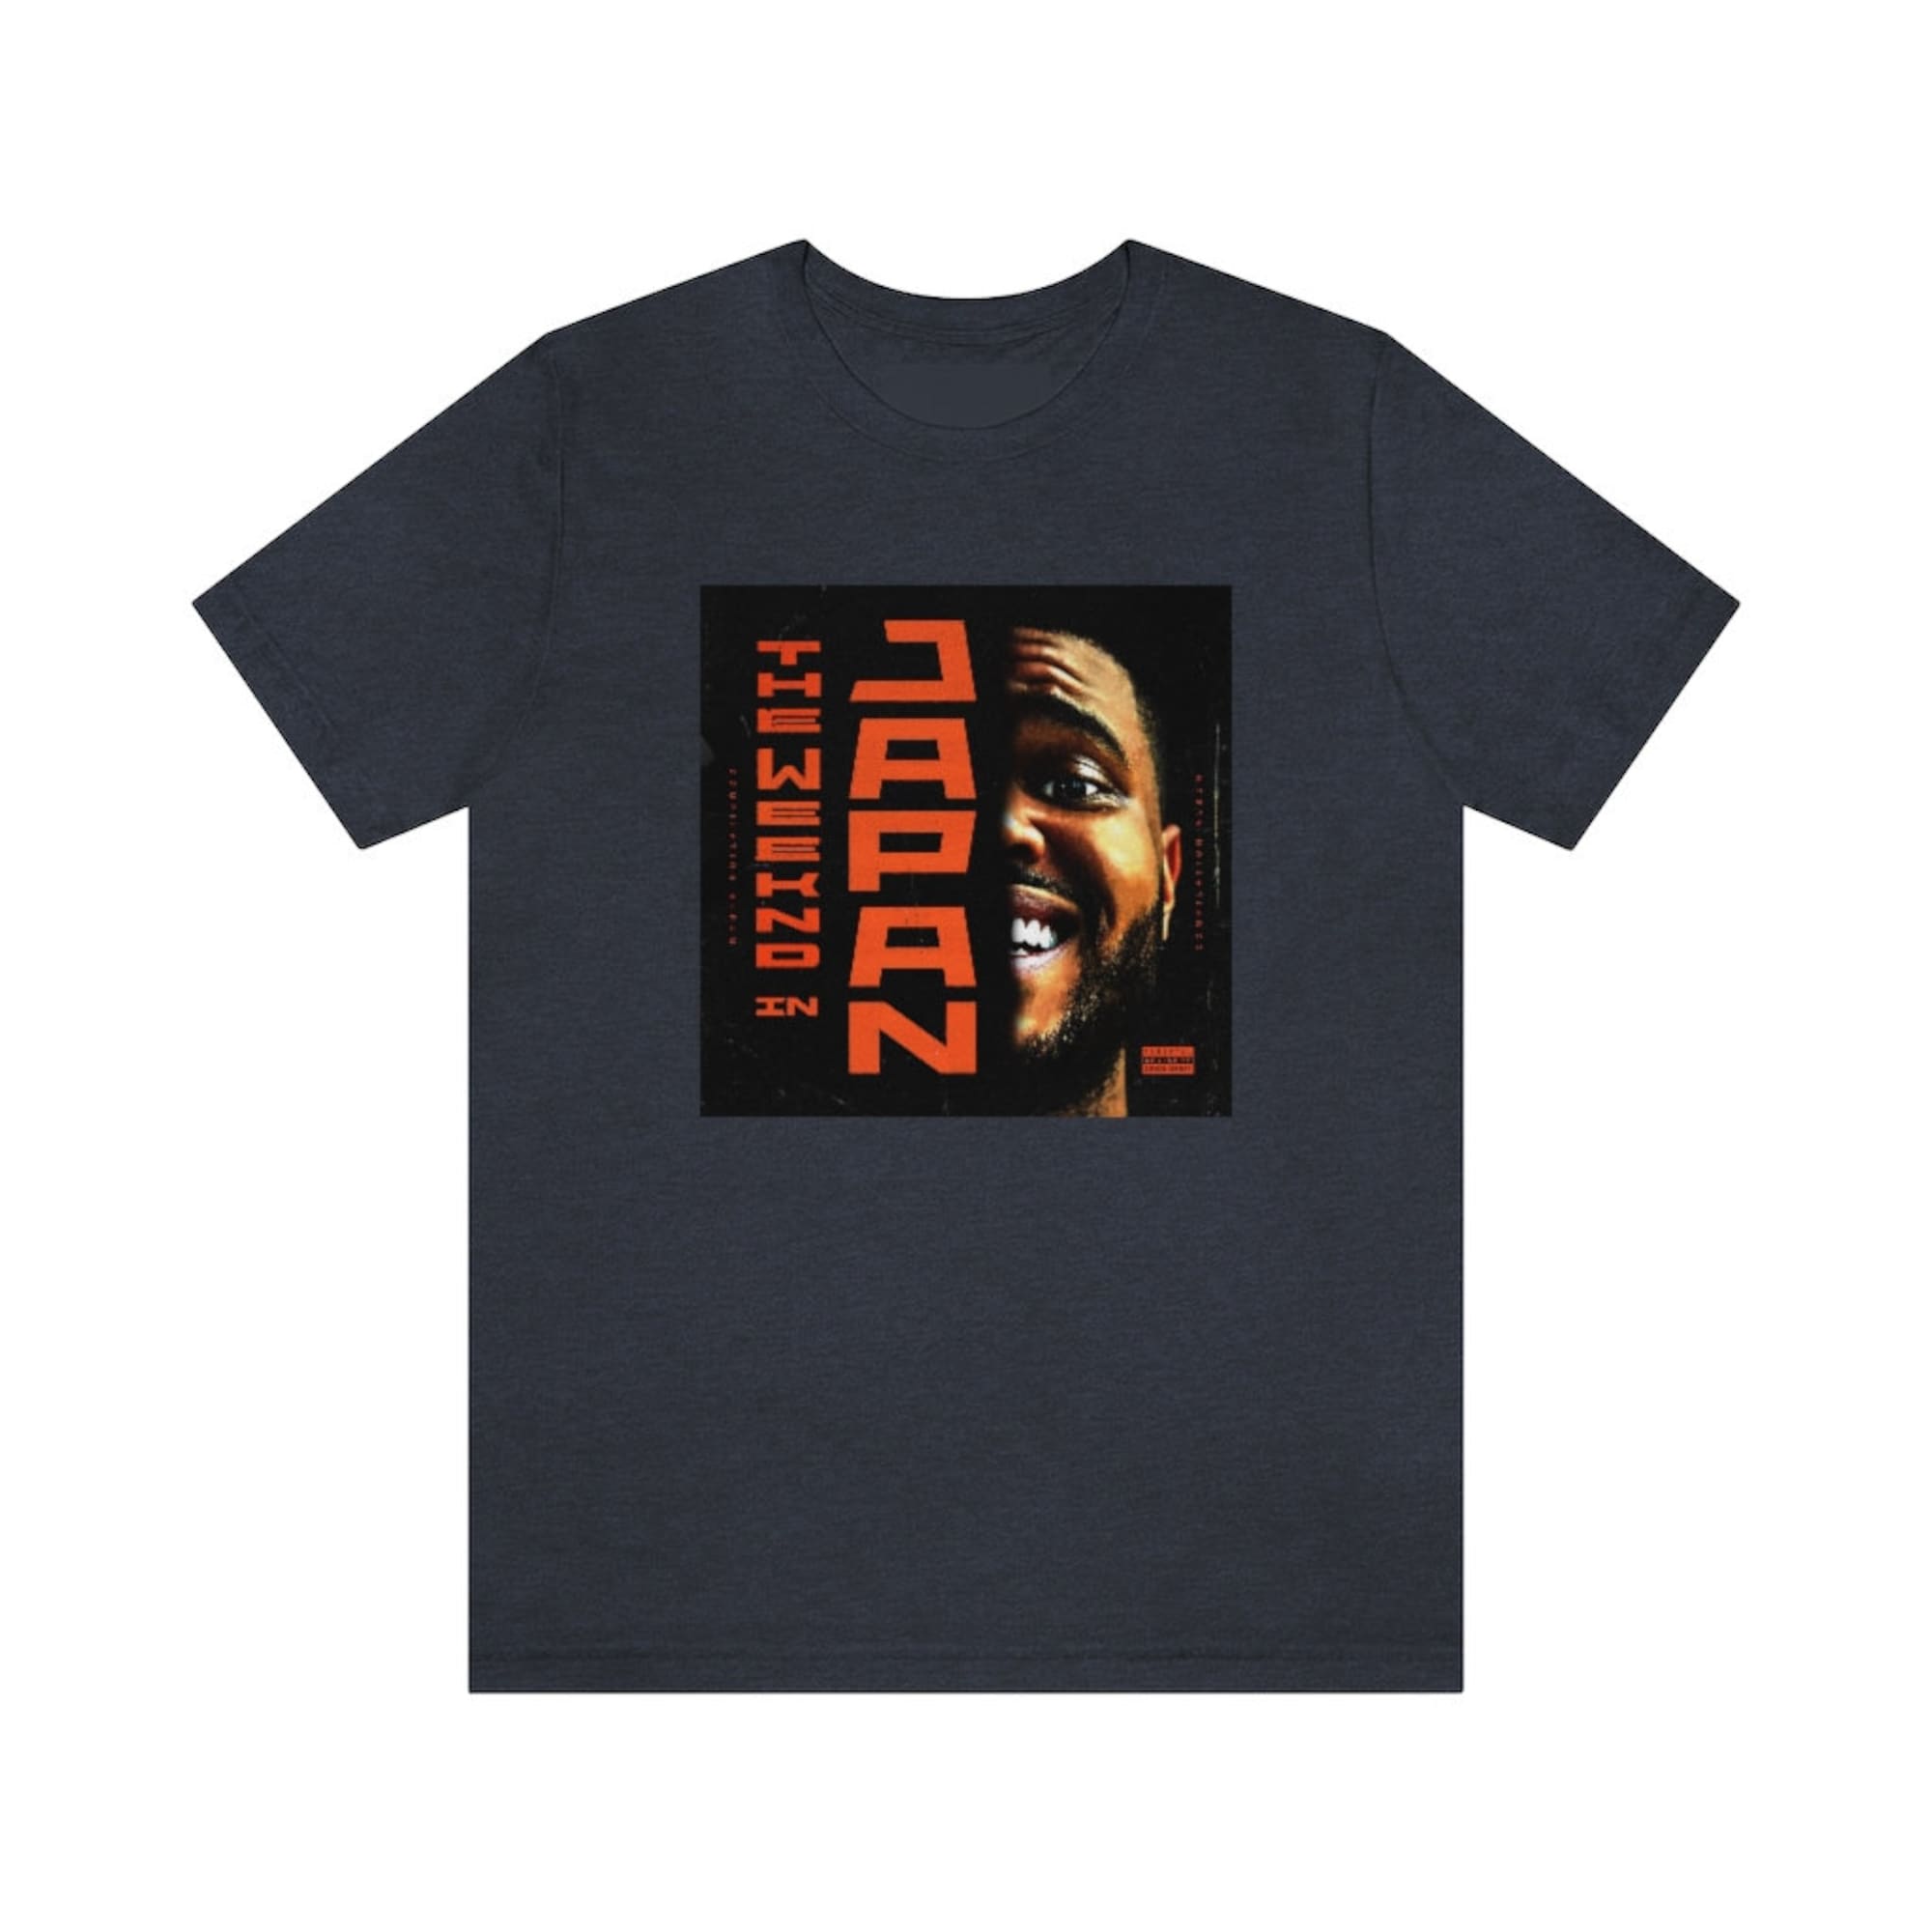 Discover The Weeknd - The Weeknd in Japan / Unisex Premium T-Shirt